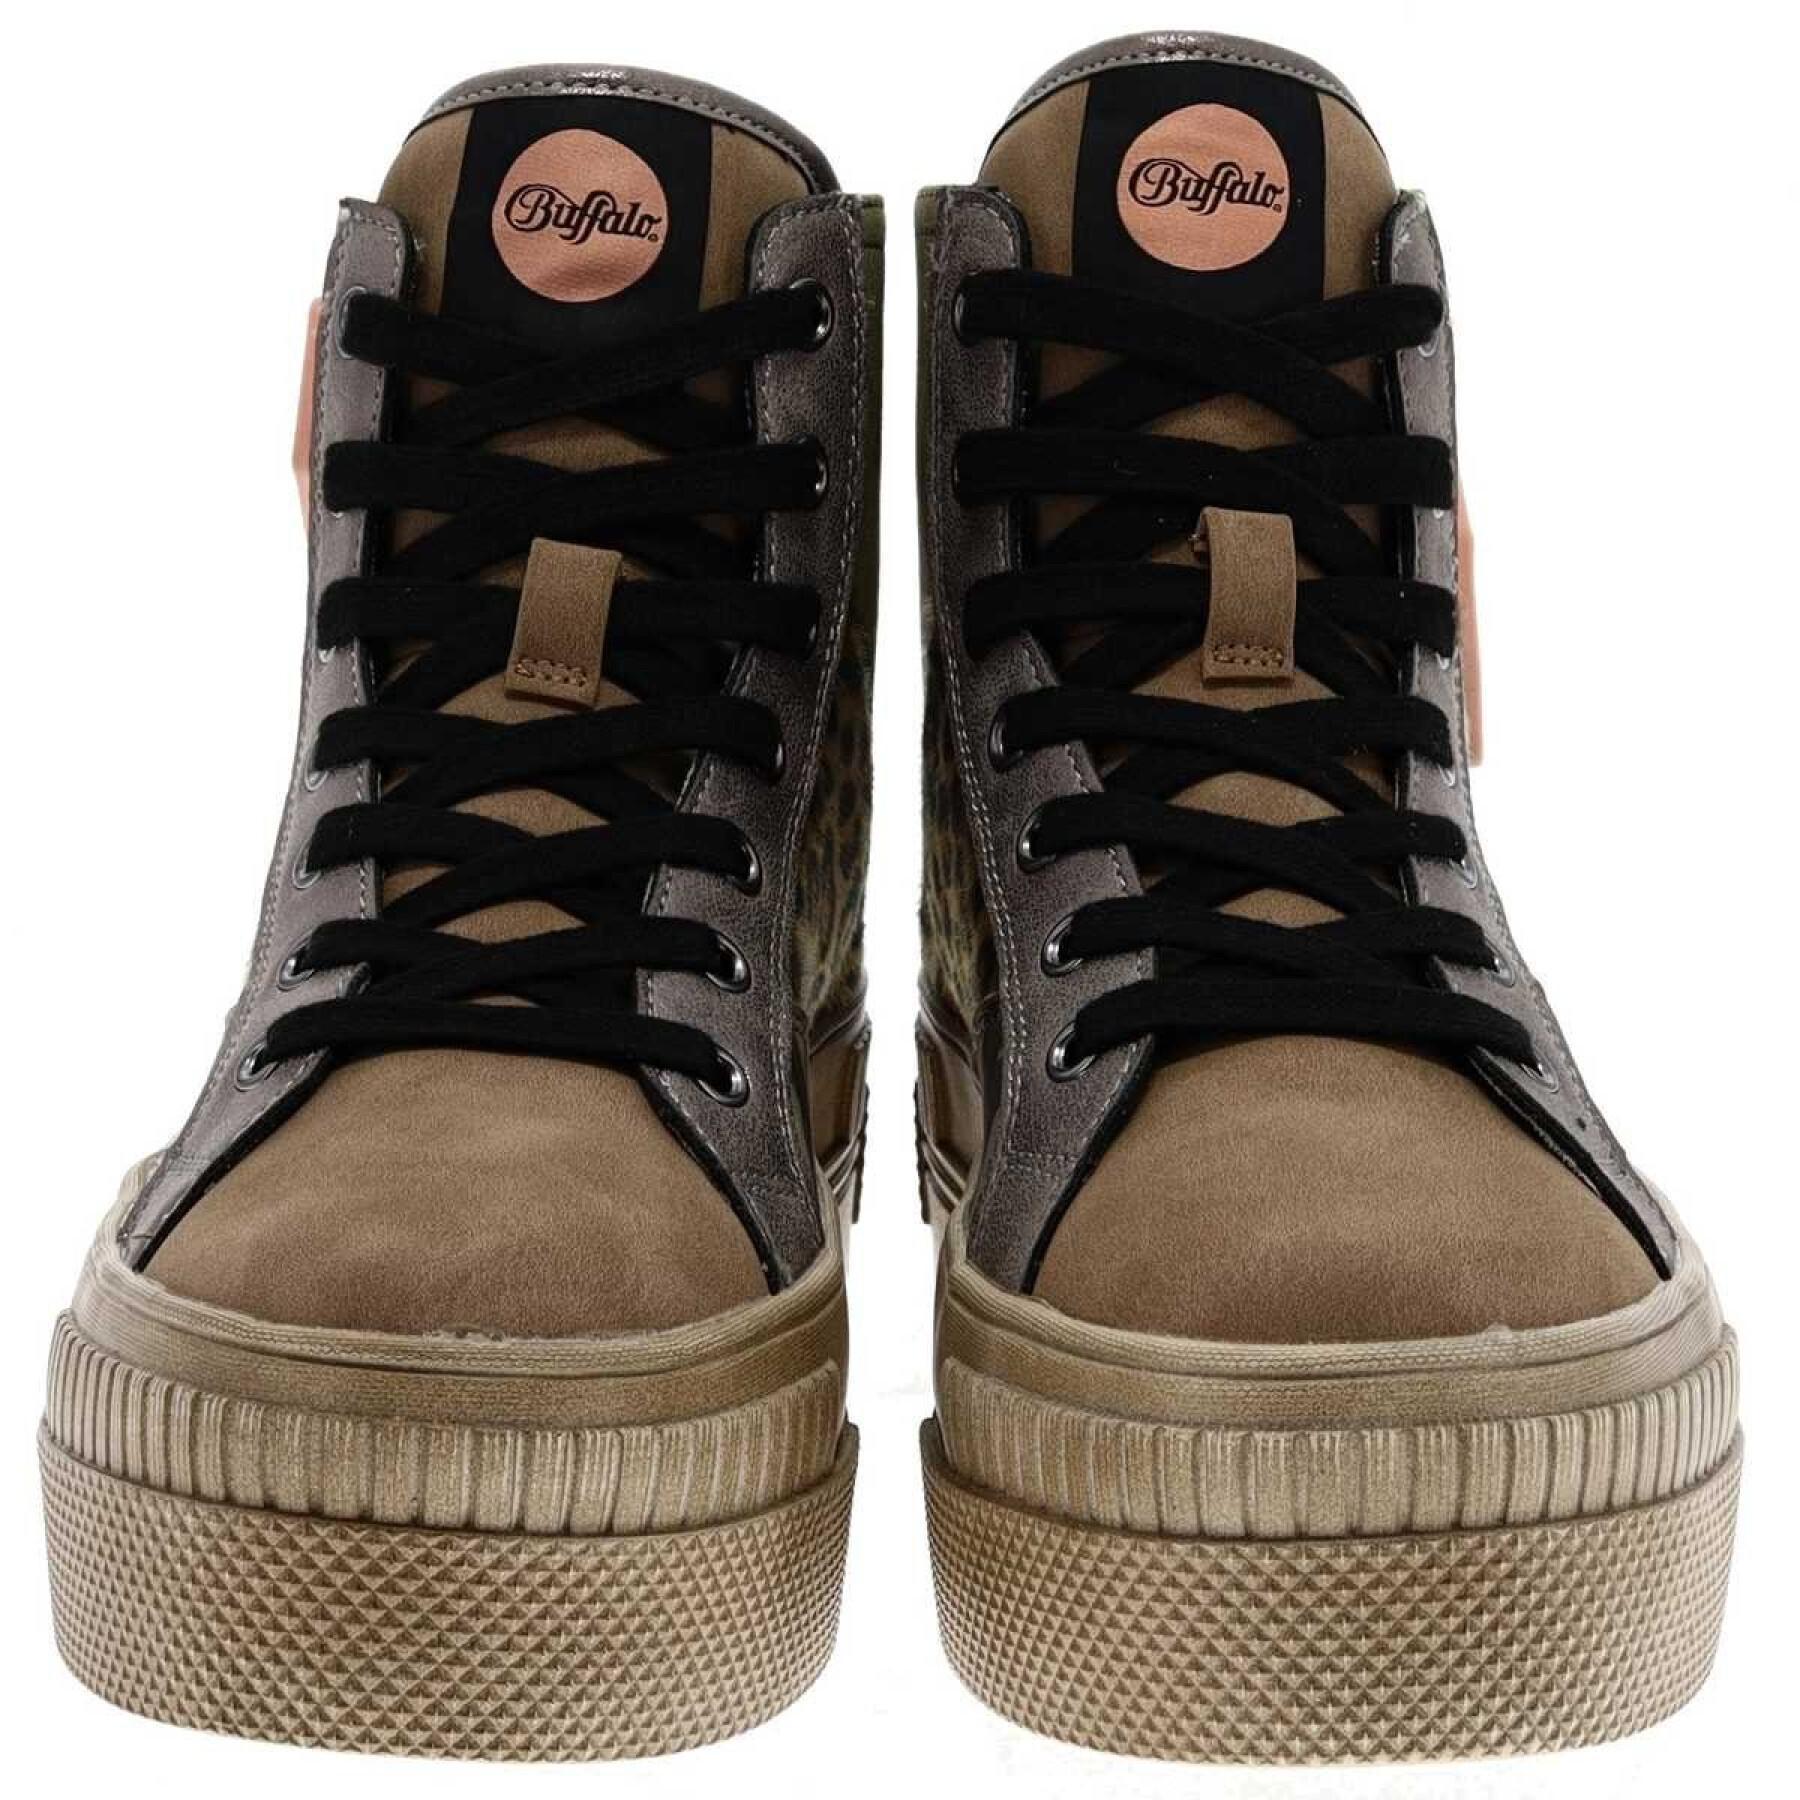 Women's lace-up sneakers Buffalo Paired Hi